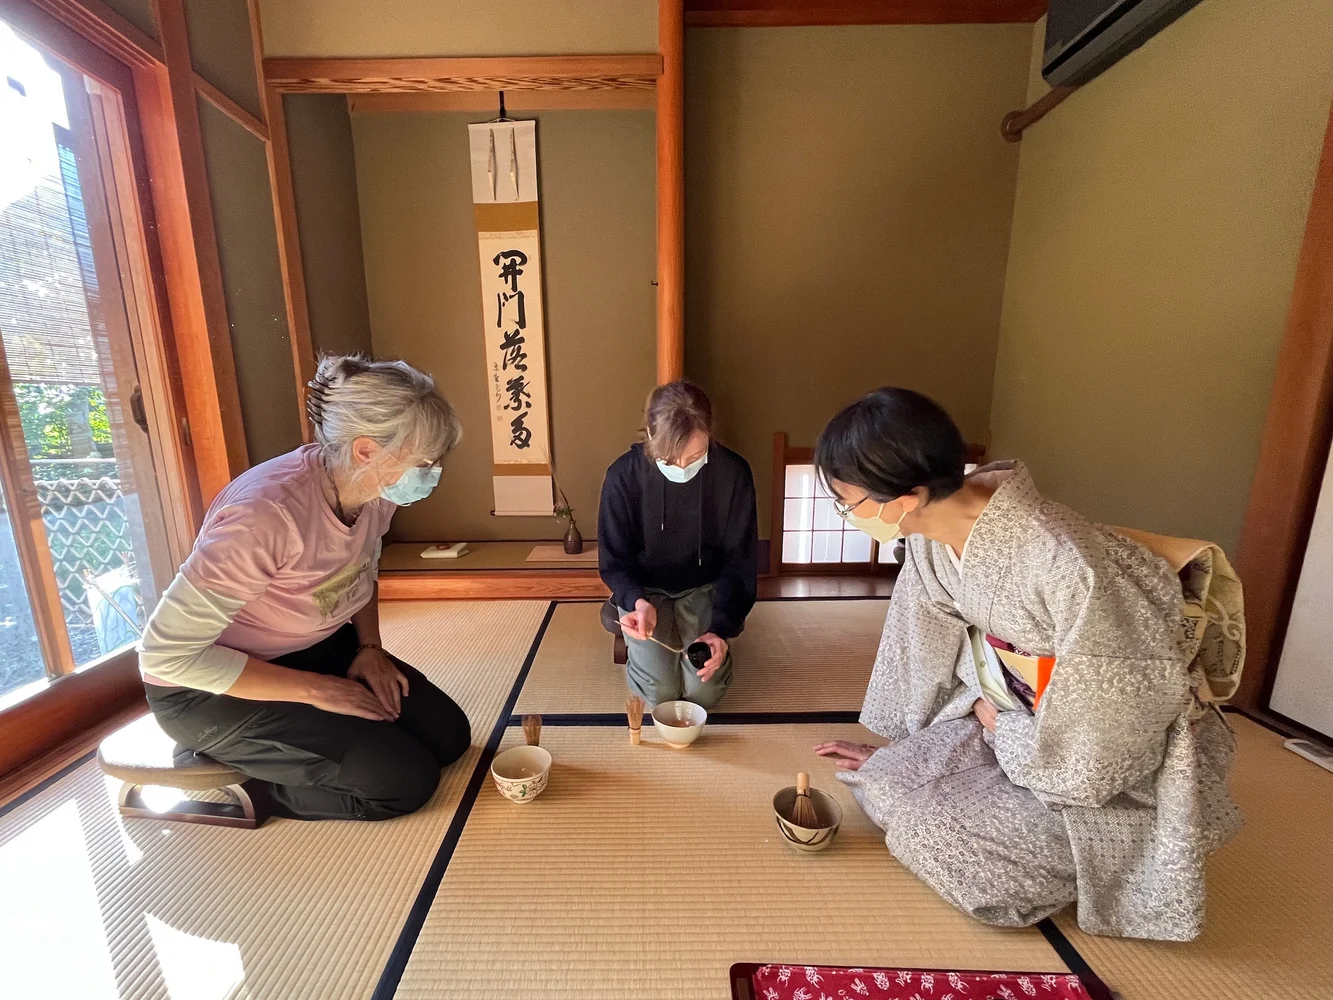 After attending the tea ceremony, you have chance to whisk matcha by yourself